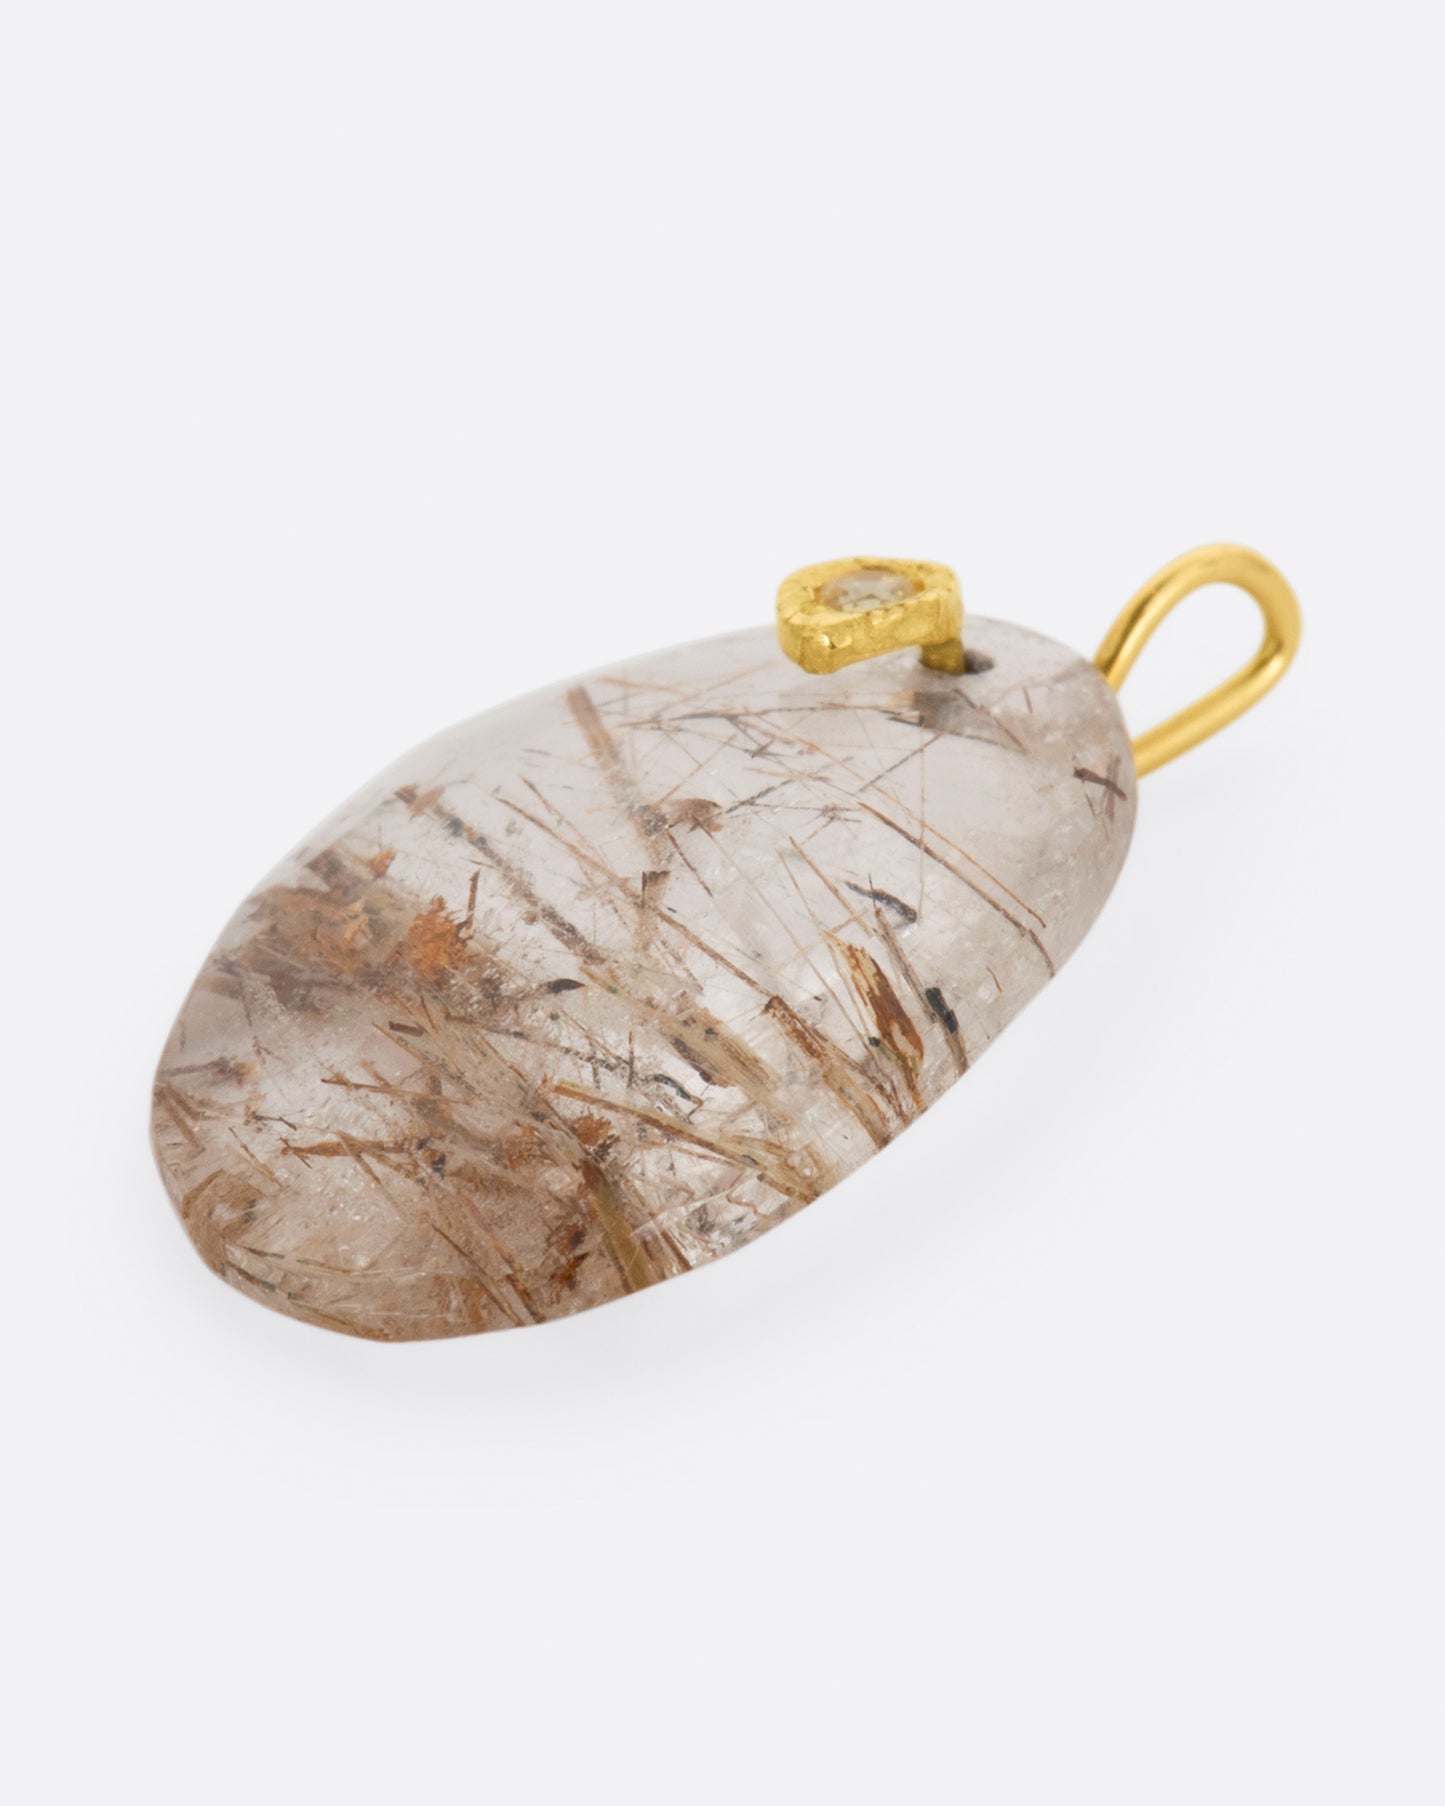 A yellow gold charm featuring a slice of rutilated quartz, with a yellow sapphire at its center. Shown from the side.